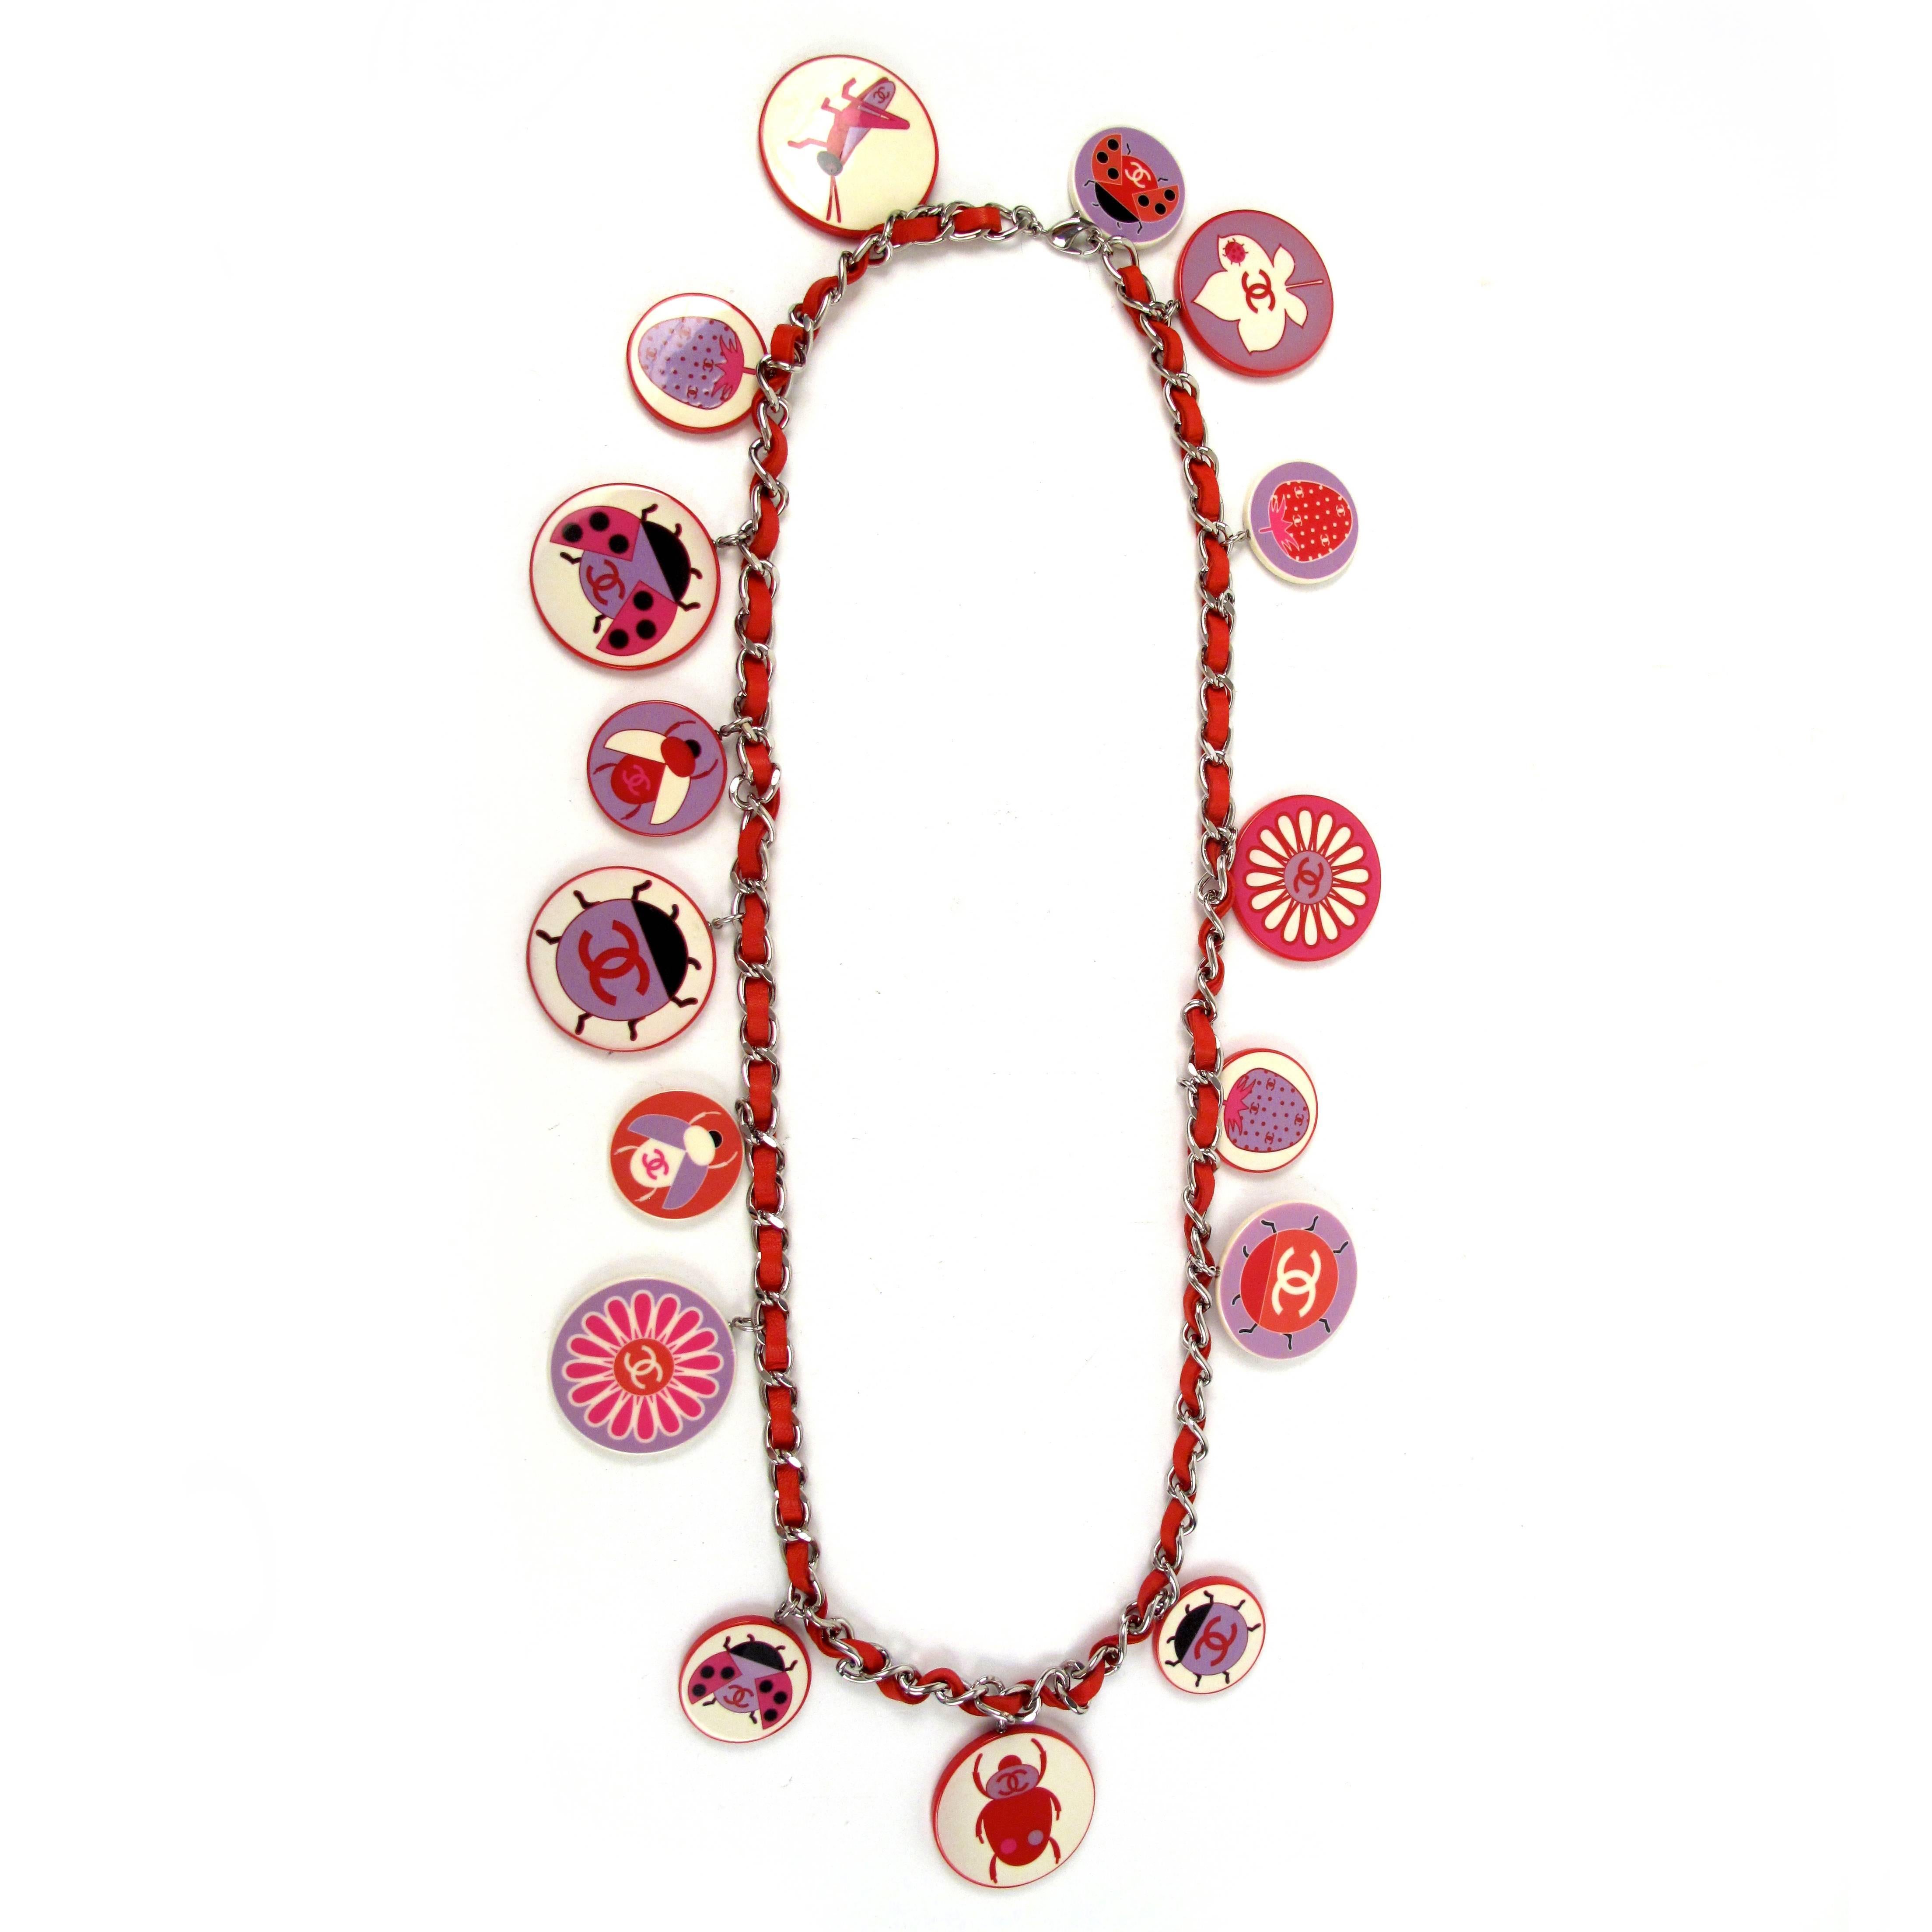 Brand New:

Chanel - Ladybug Charm Necklace / Belt

Rare Collectors item!

Color: Red / Multi

Material: Leather

------------------------------------------------------------

Details:

- red leather woven chain

- silver tone